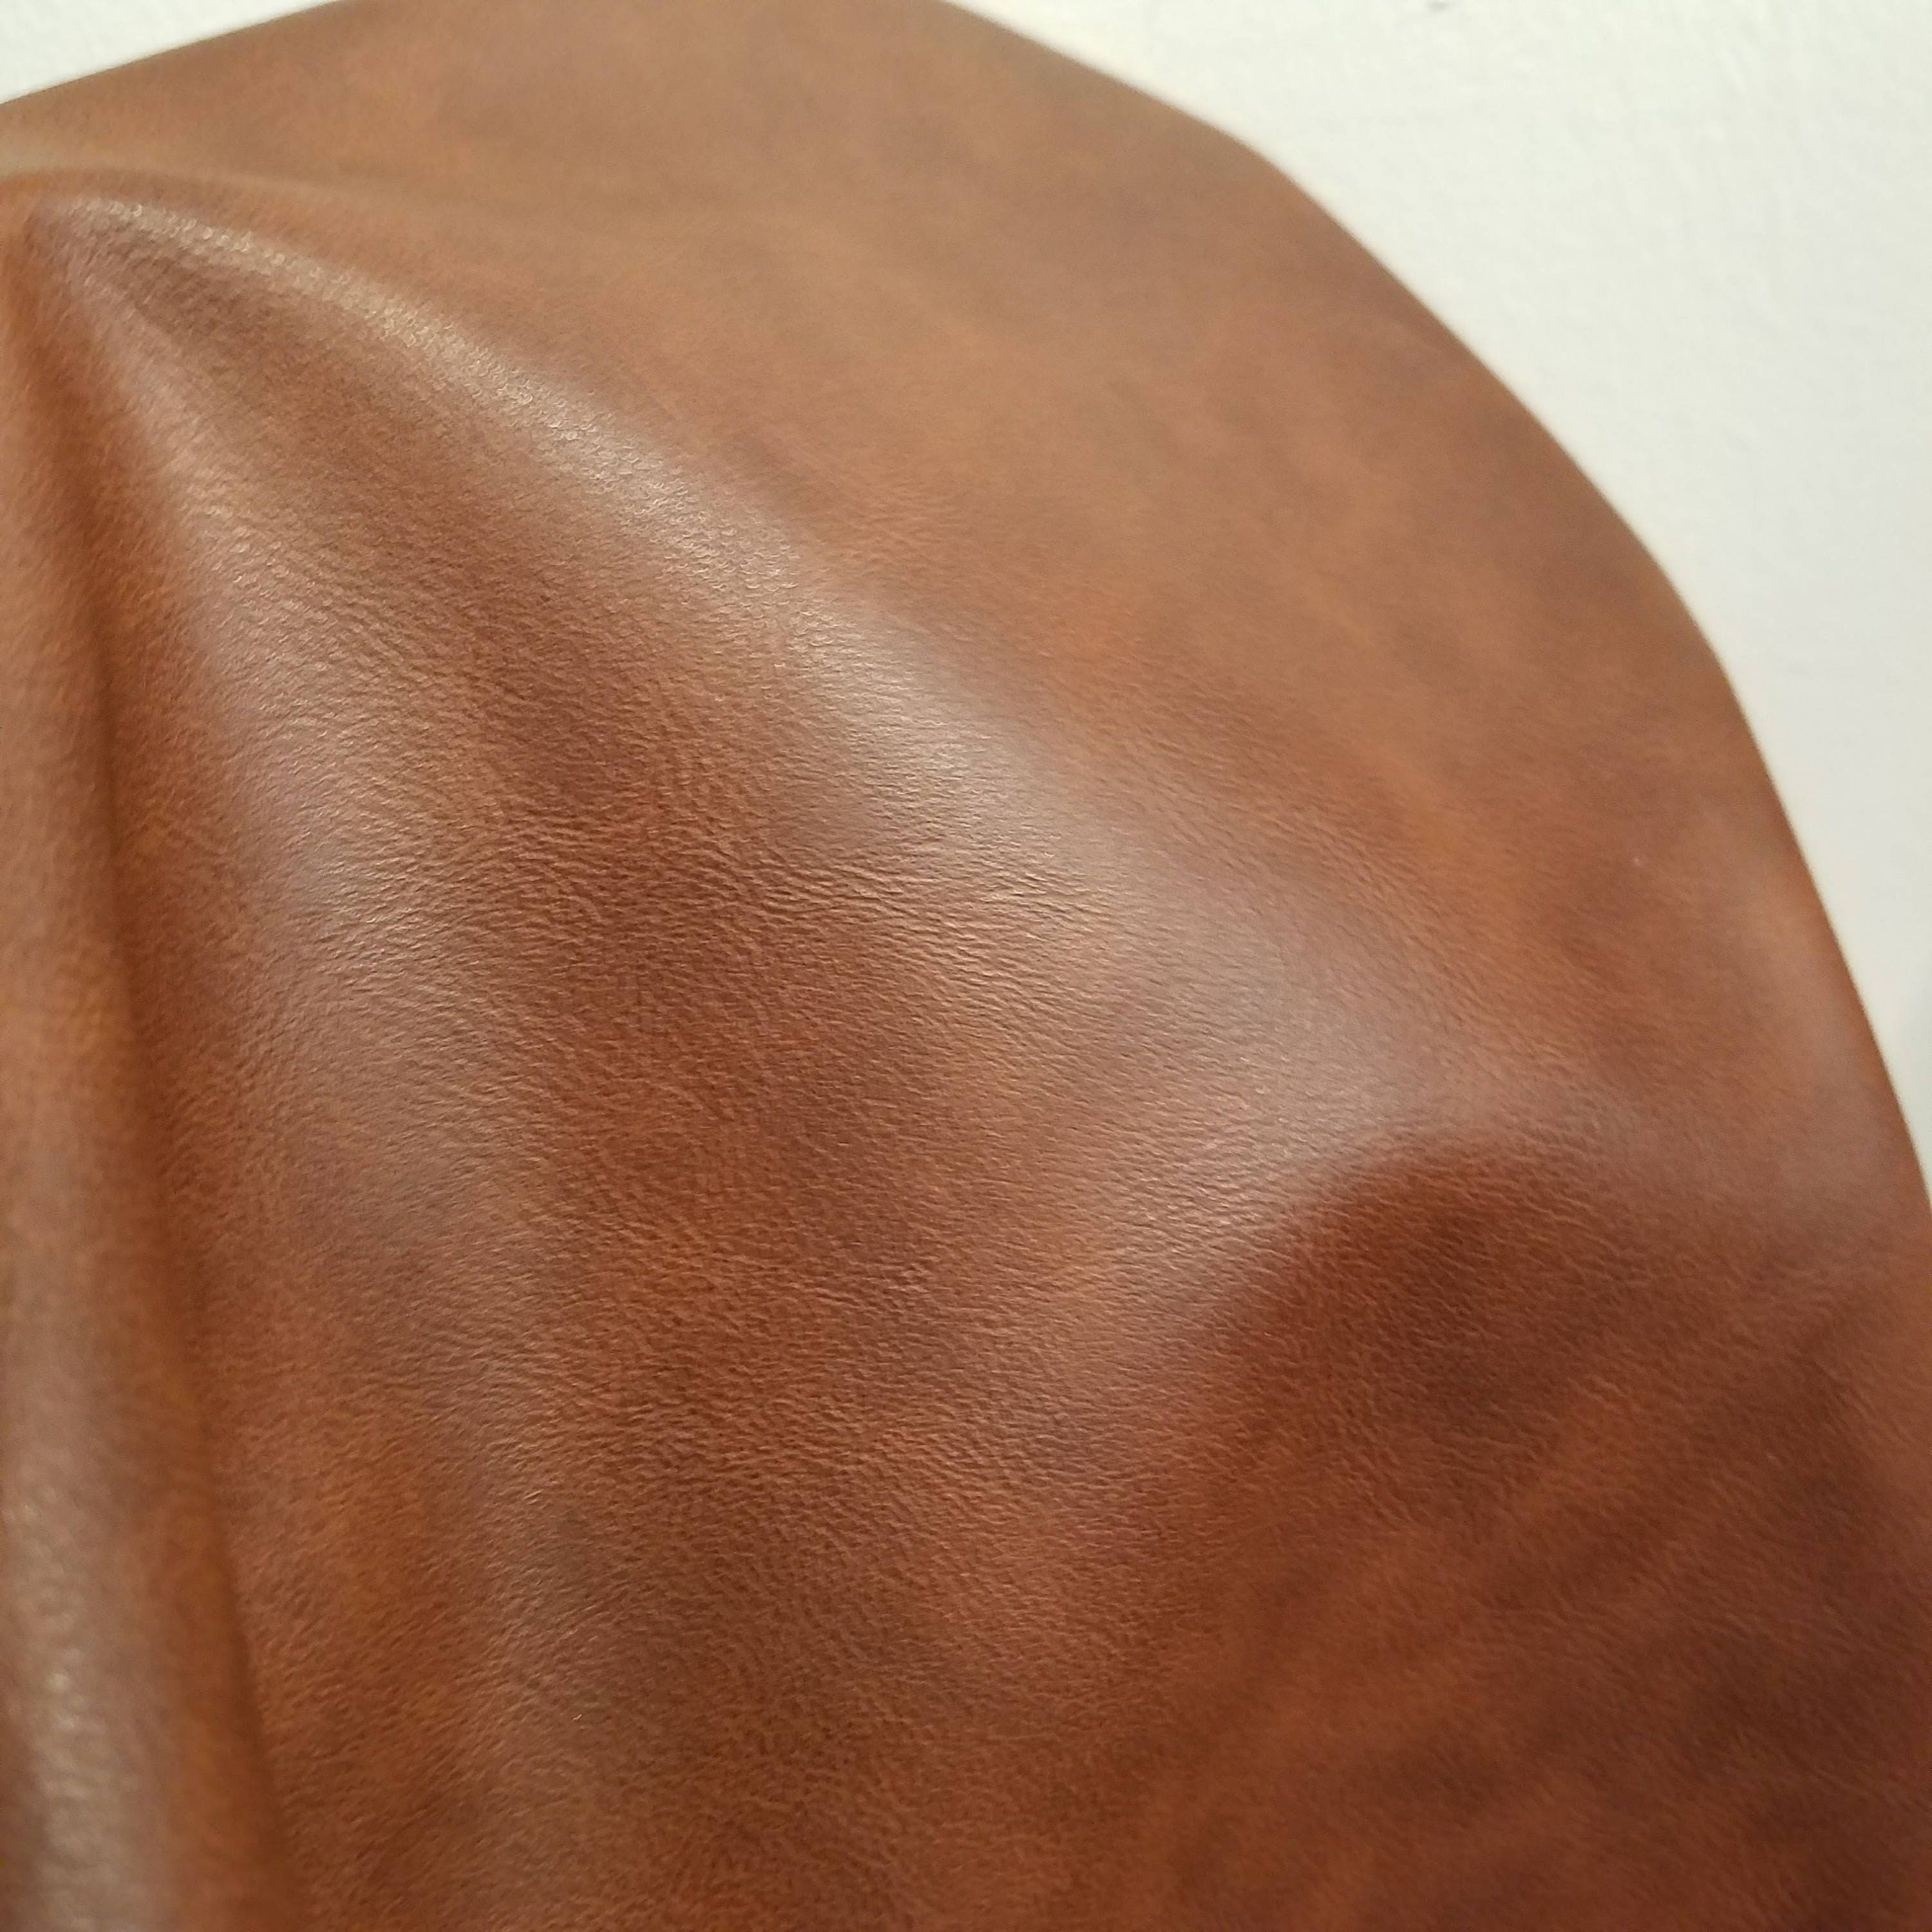 Brown faux leather